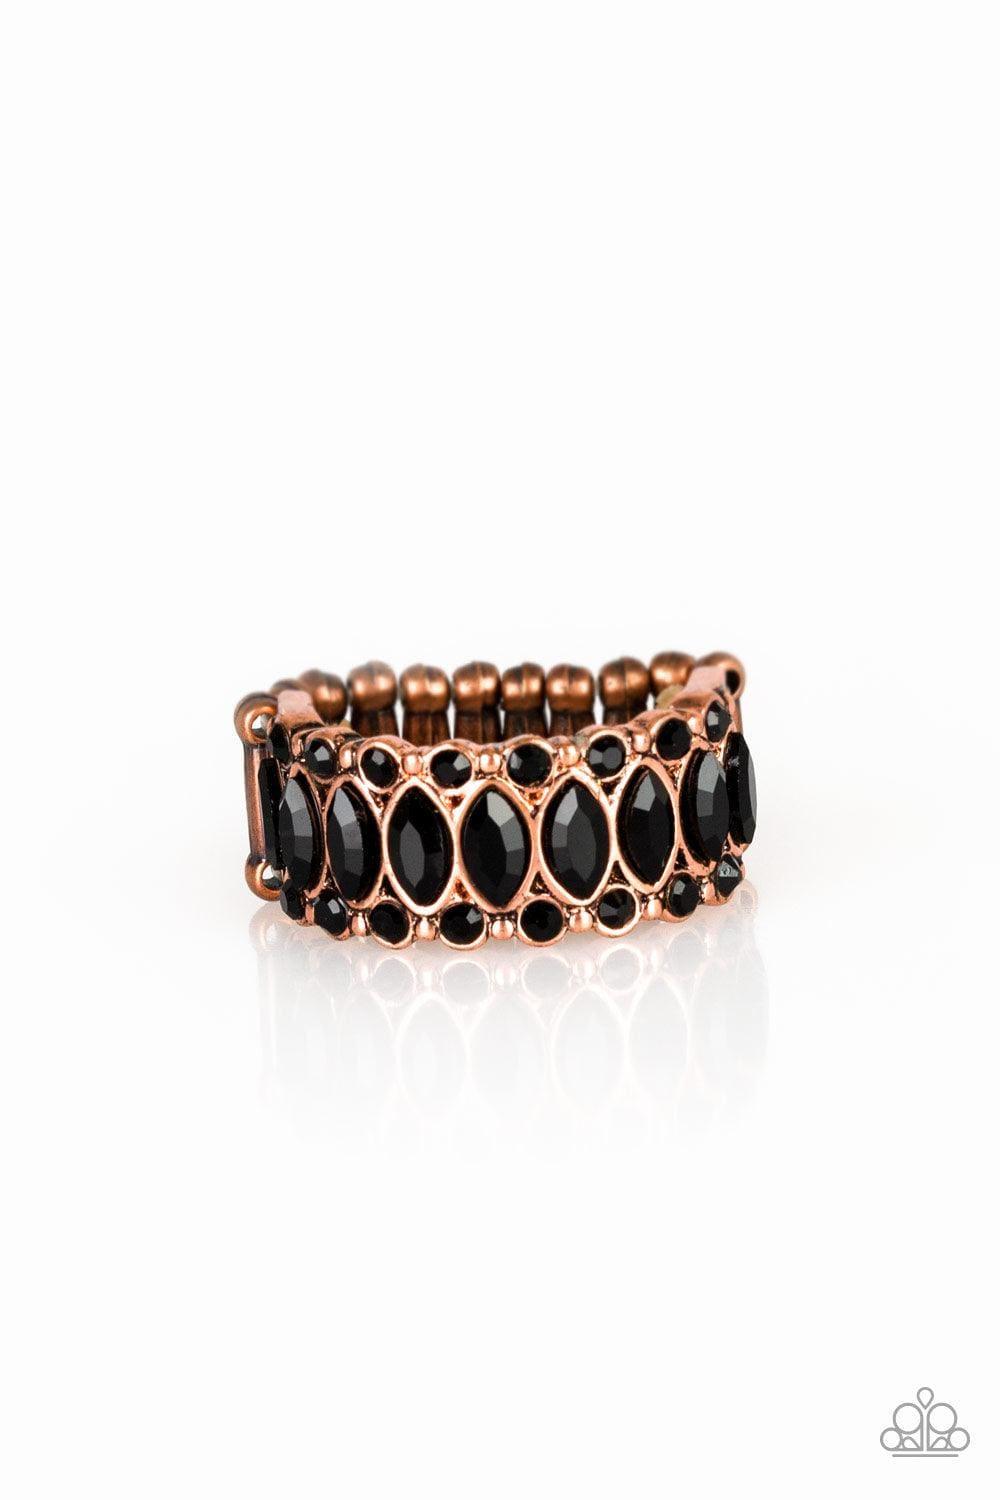 Paparazzi Accessories - Radical Riches - Copper Ring - Bling by JessieK